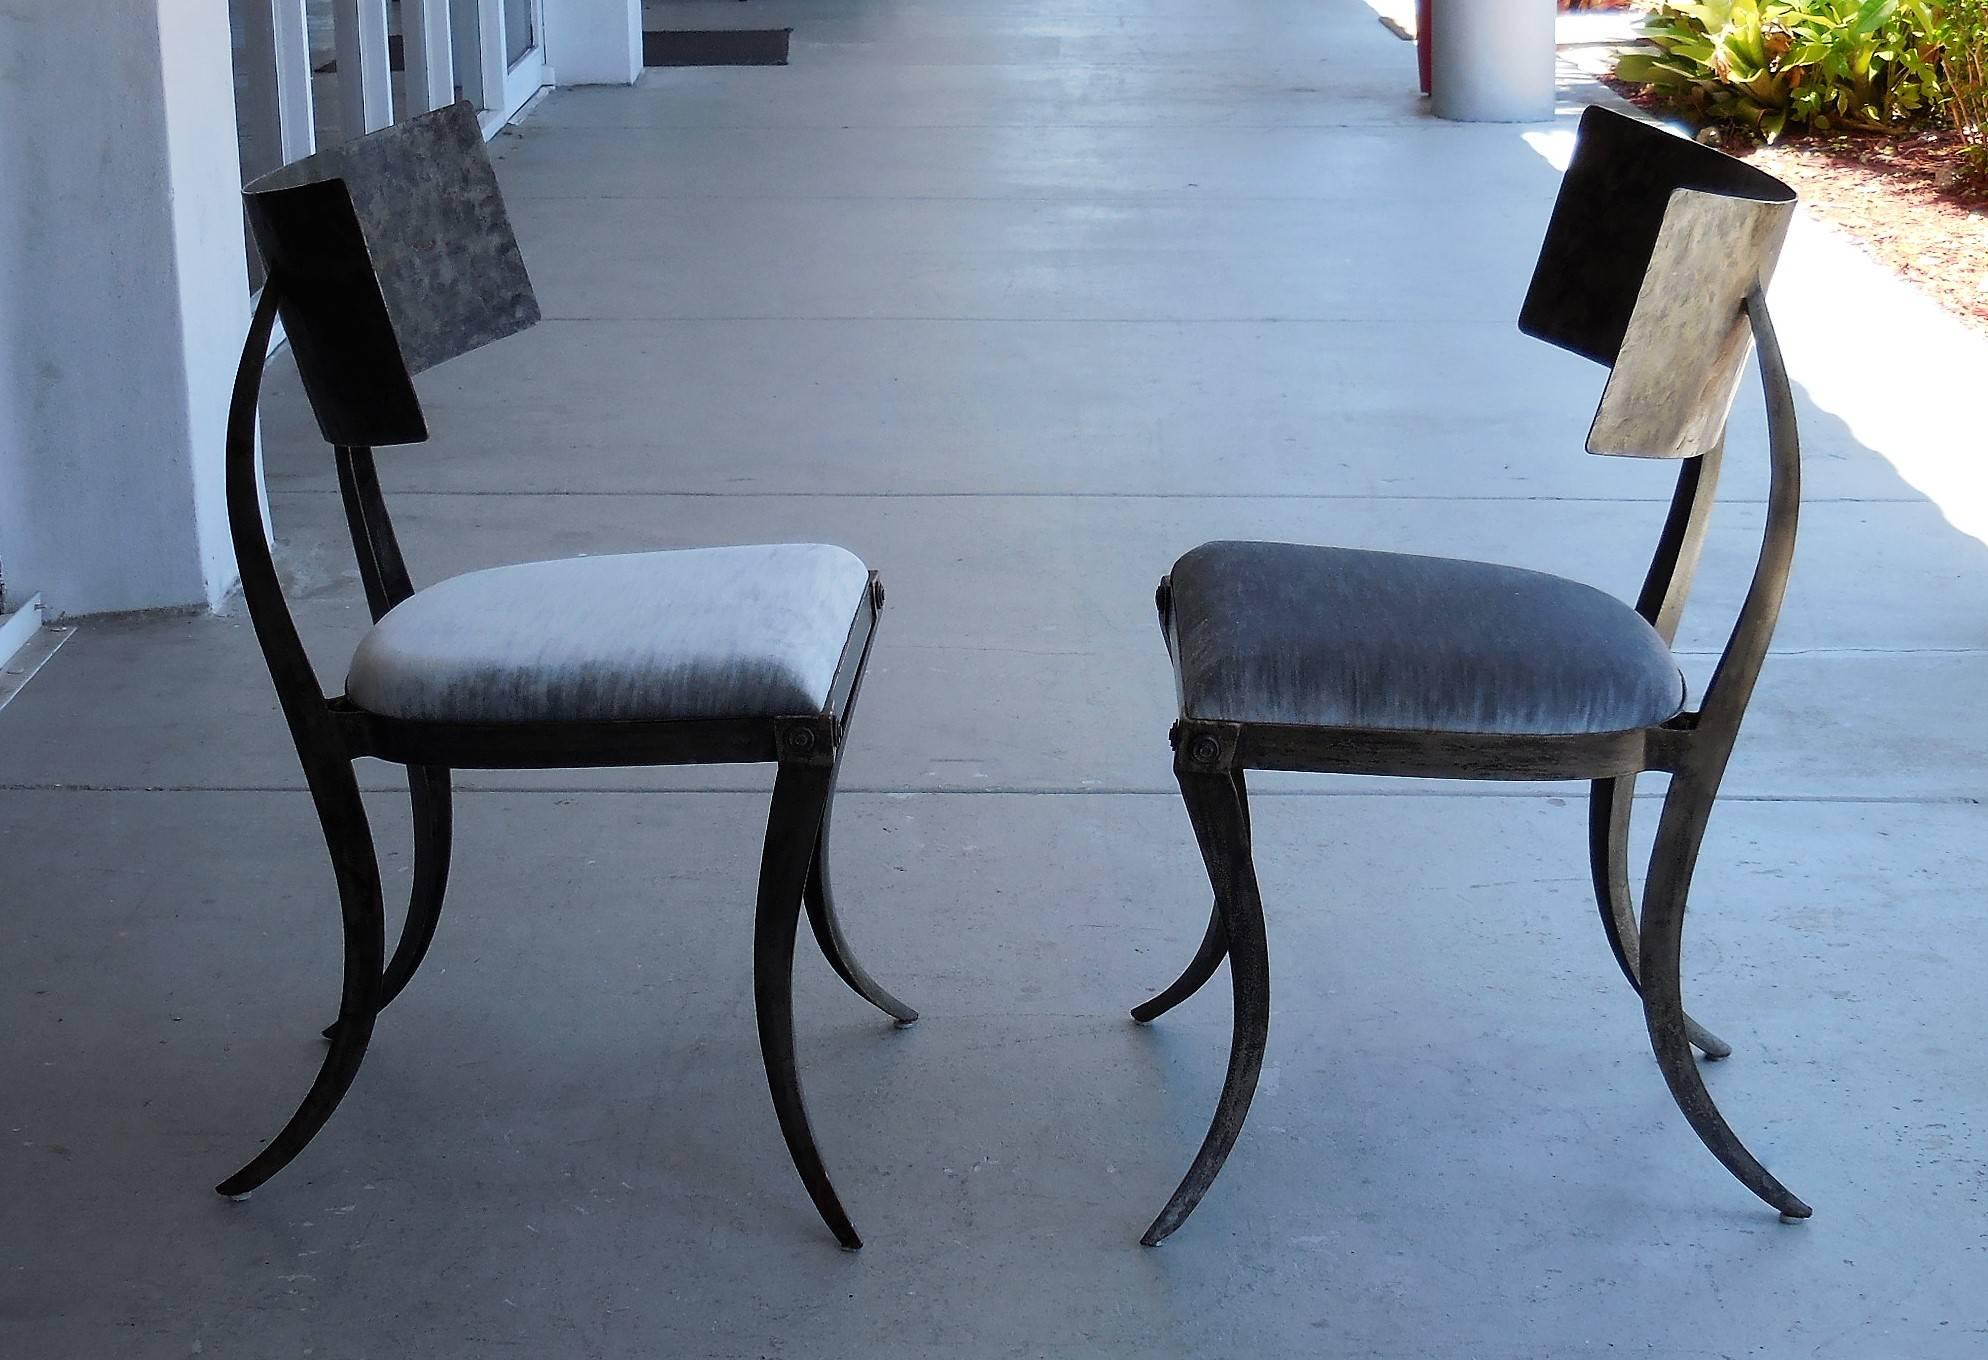 A pair of klismos chairs in patinated steel and upholstered seats. These chairs have a bold and graceful design.